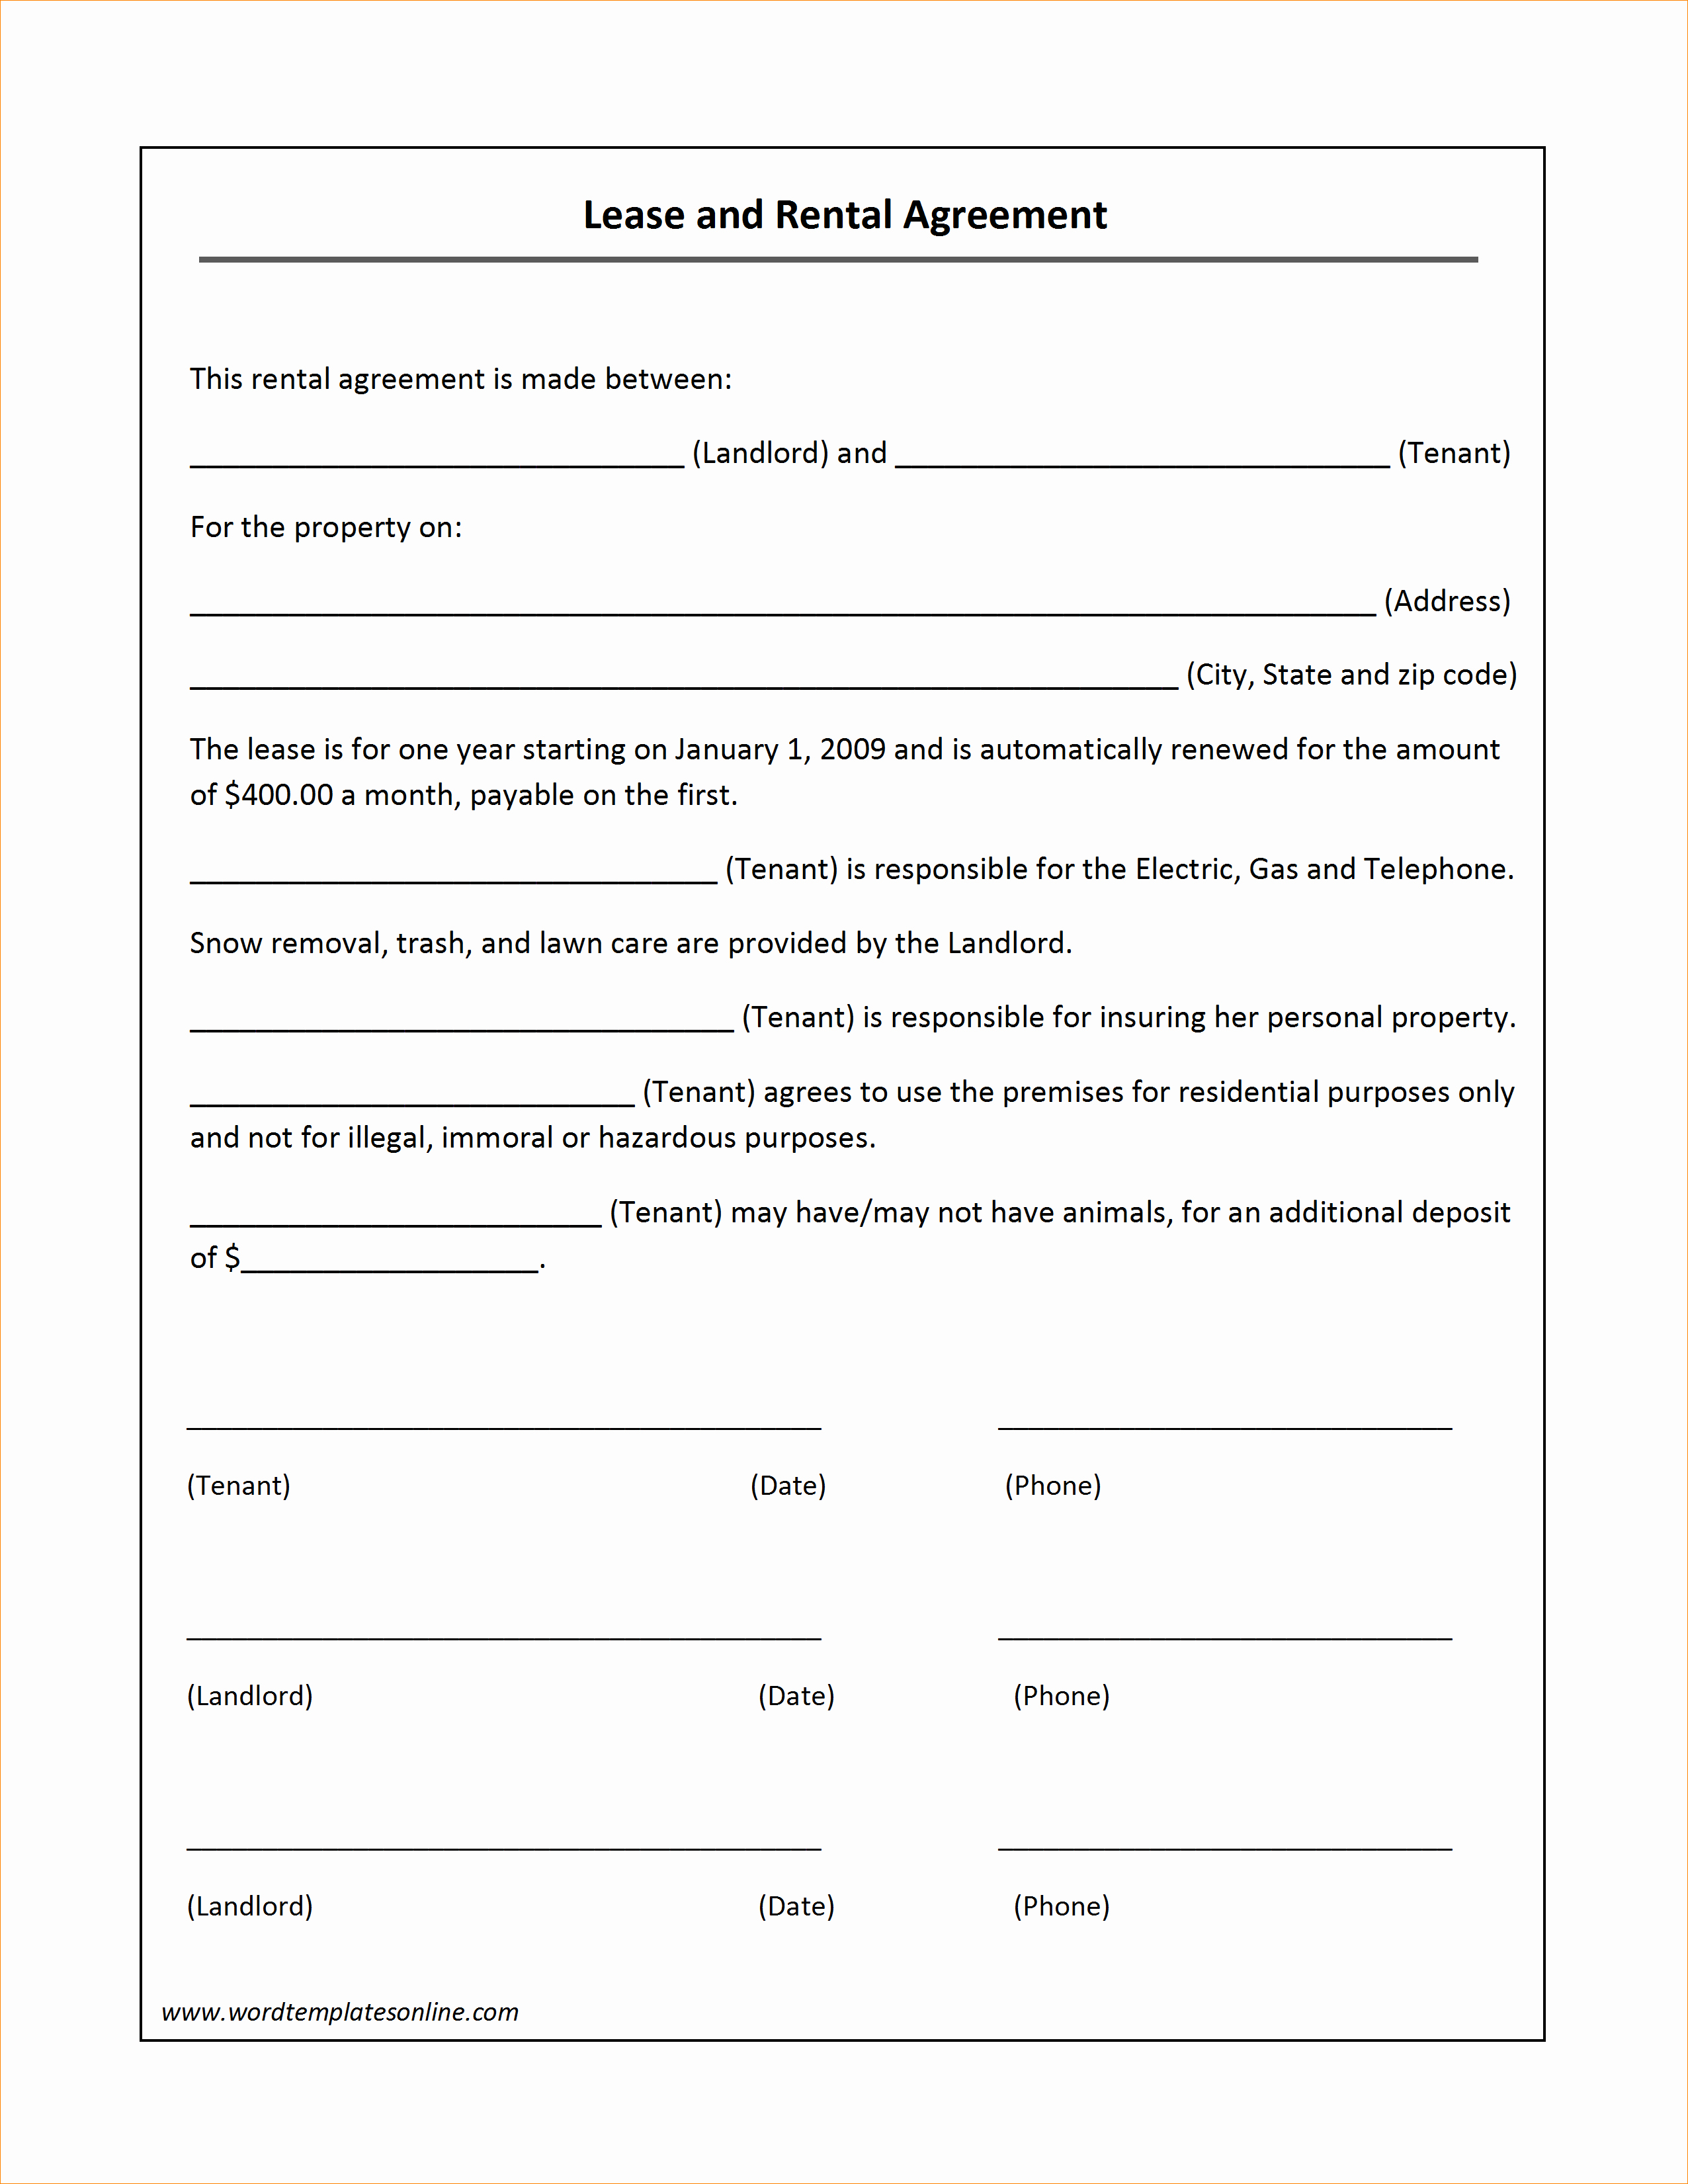 free lease agreements template